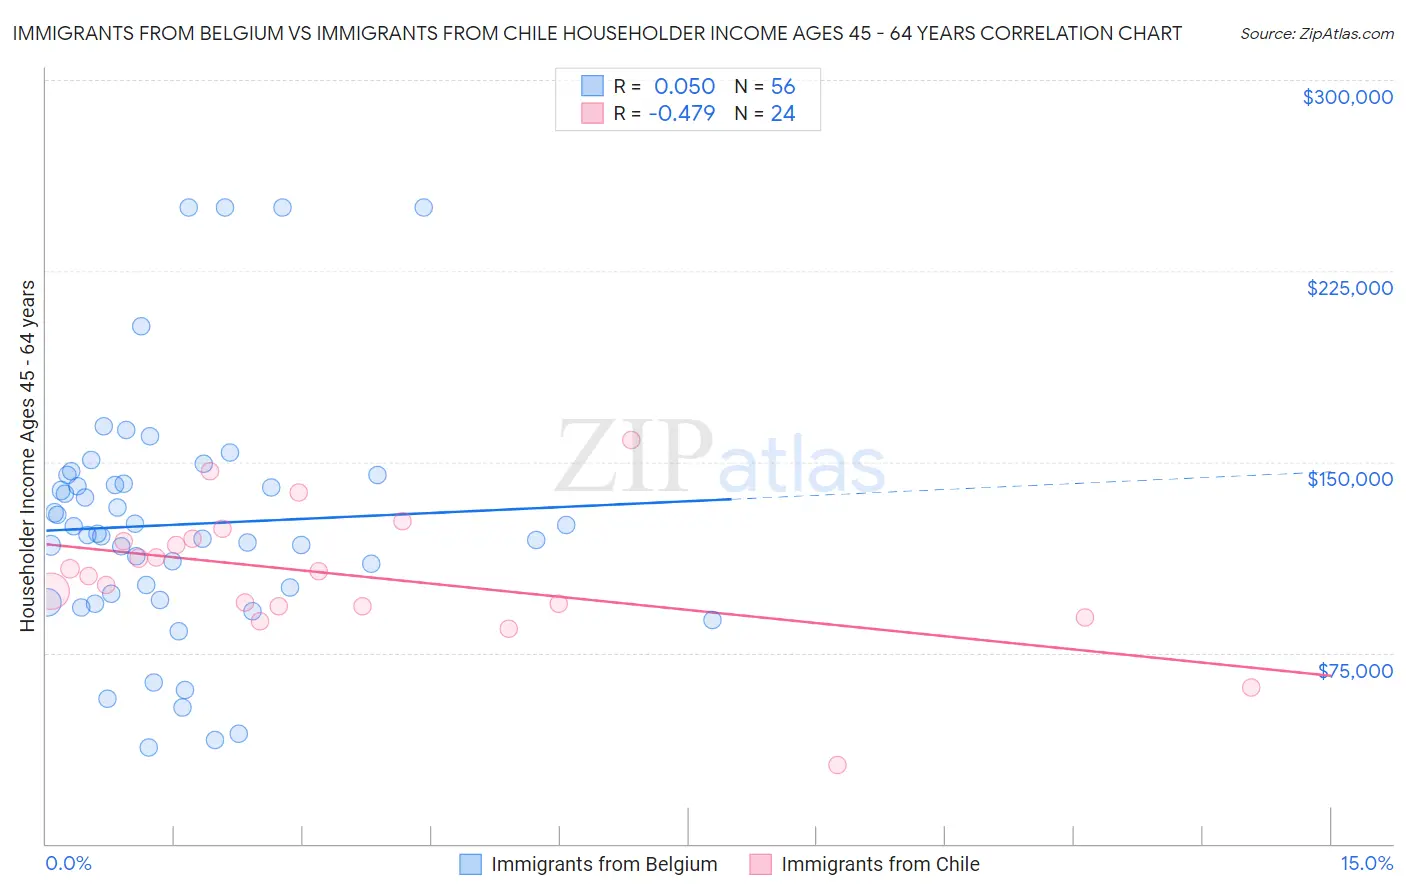 Immigrants from Belgium vs Immigrants from Chile Householder Income Ages 45 - 64 years